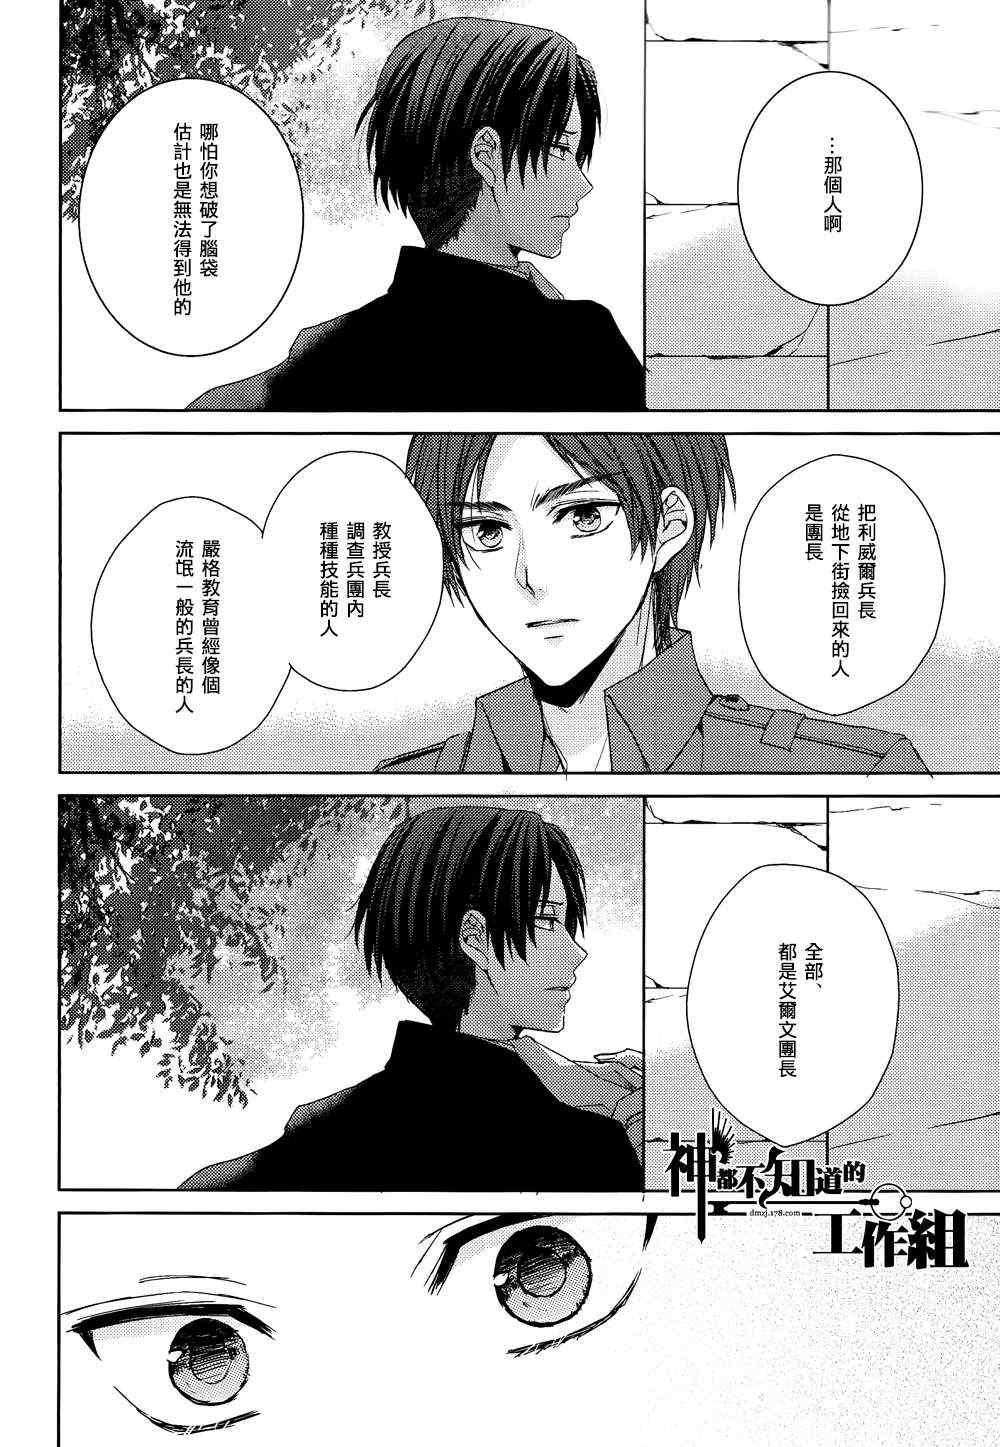 《My heart to you》漫画 01集